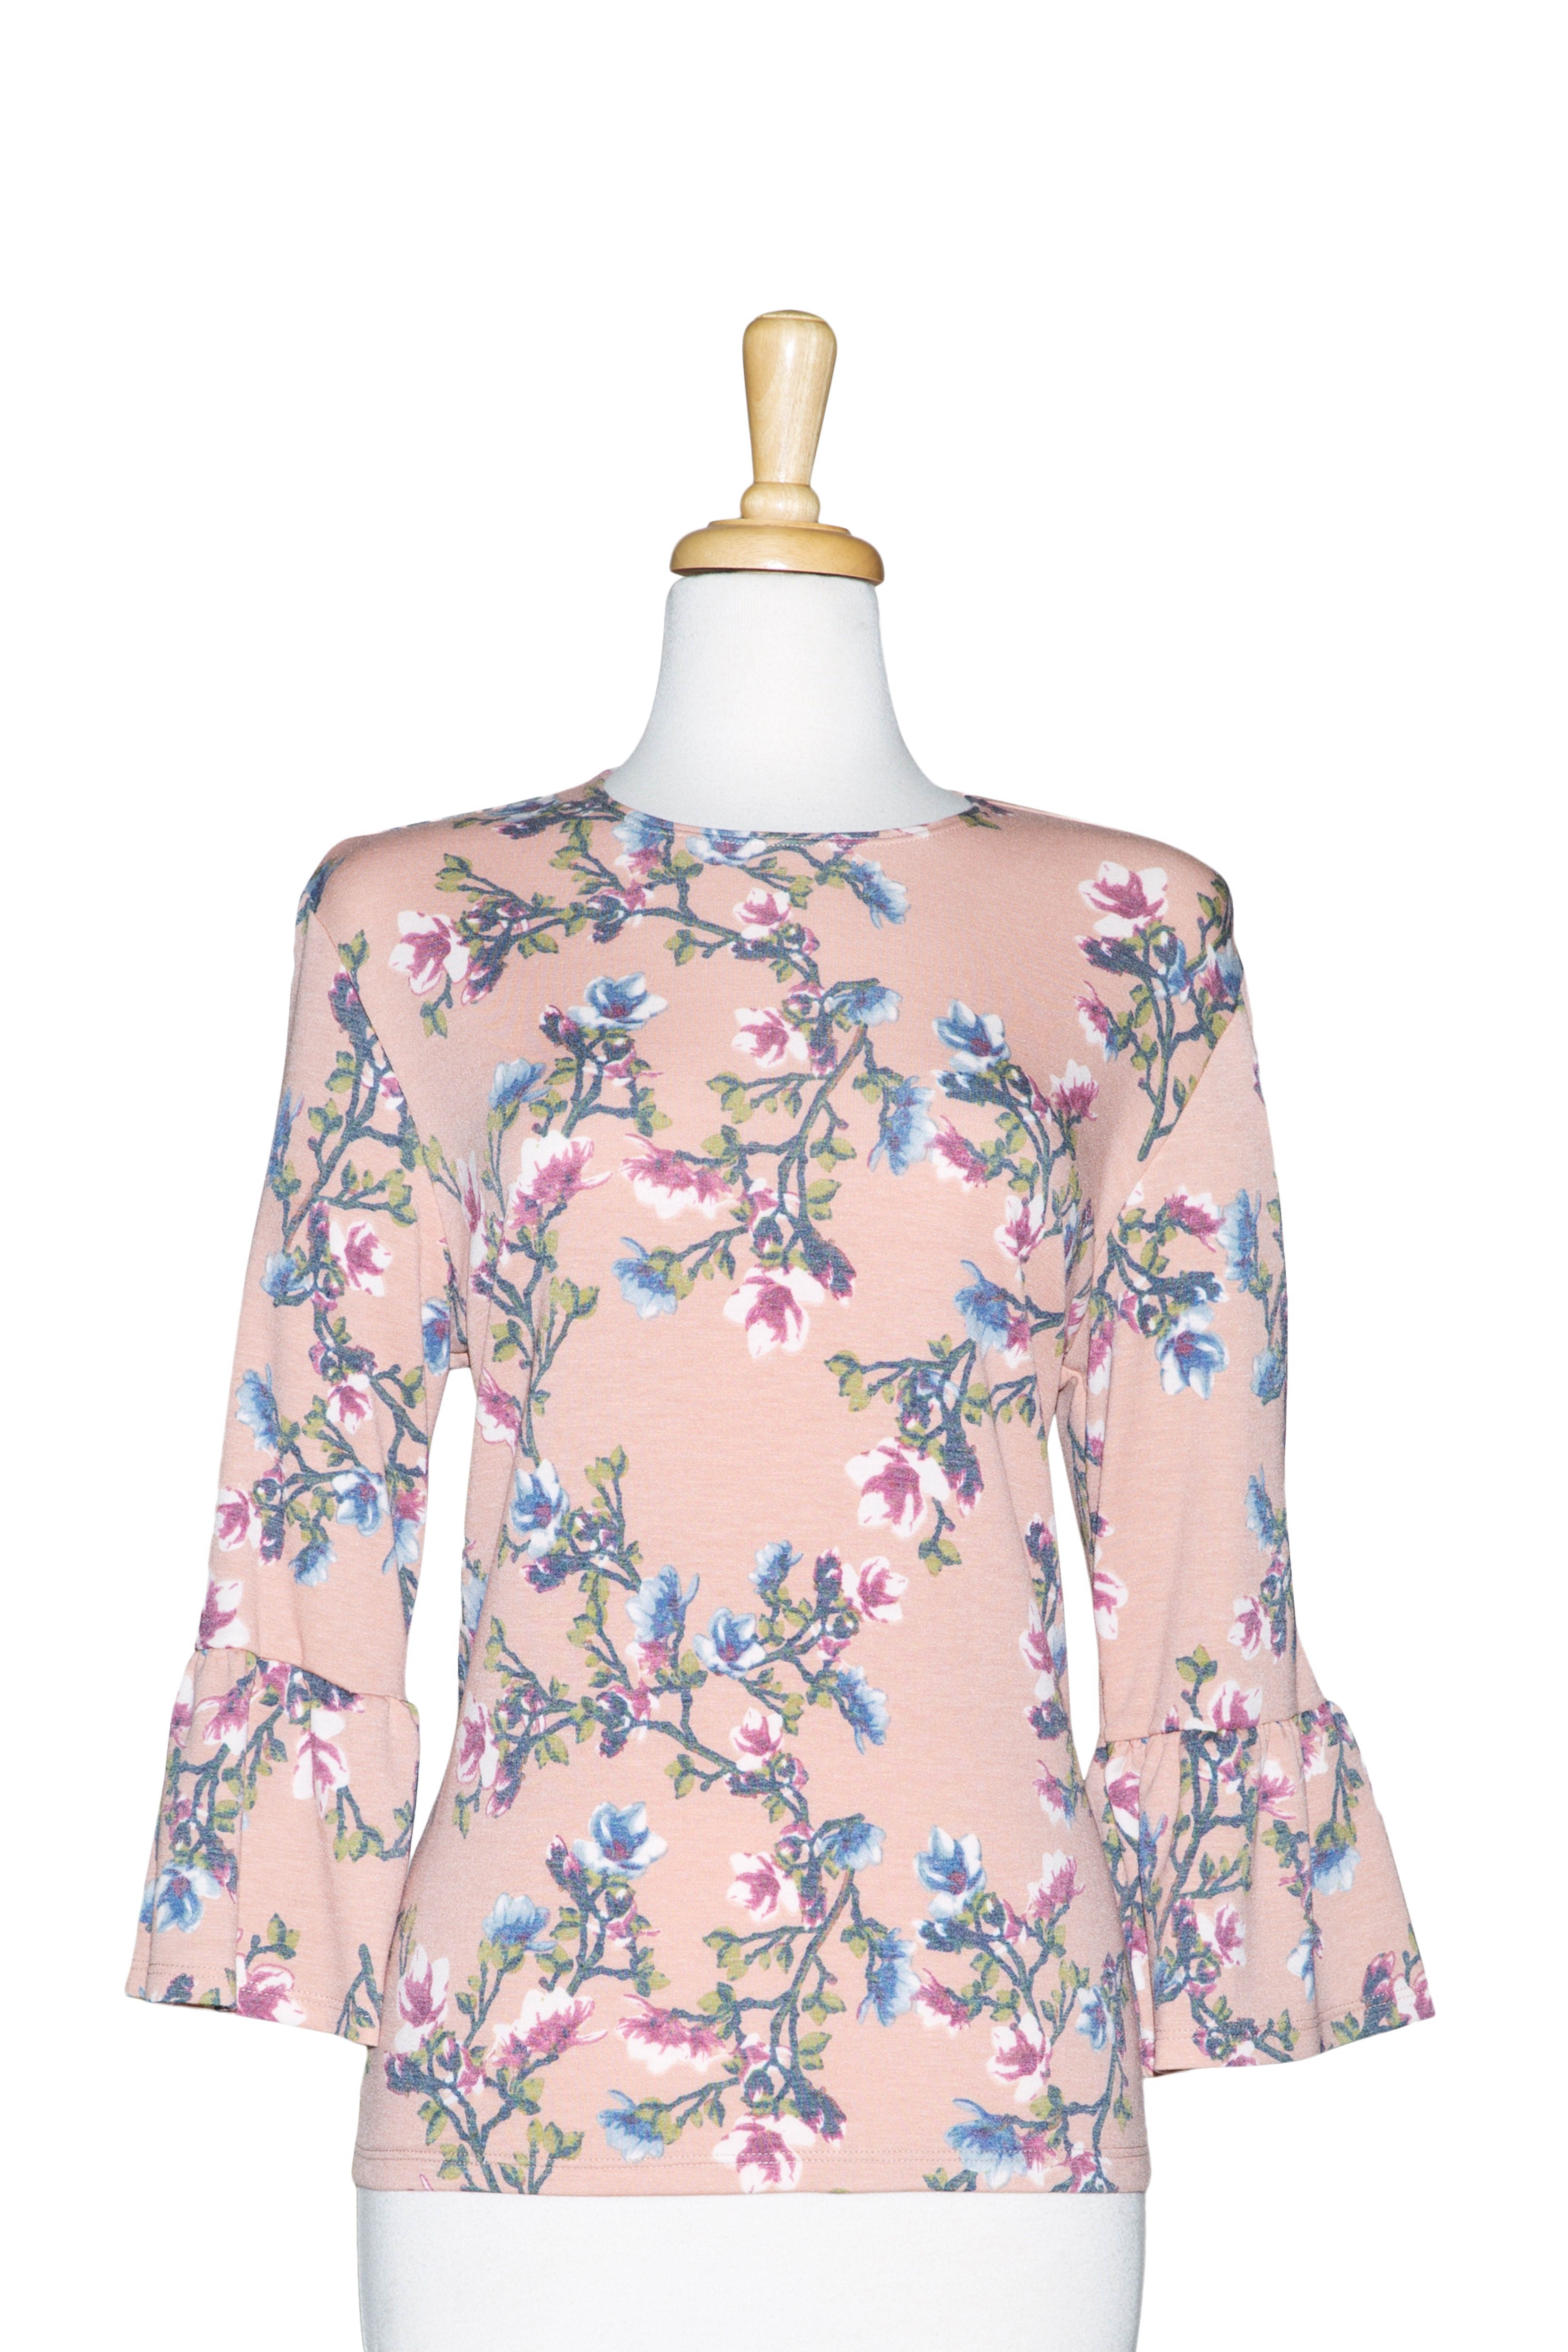 Peach Floral Light Cotton Terry 3/4 Bell Sleeve Top 